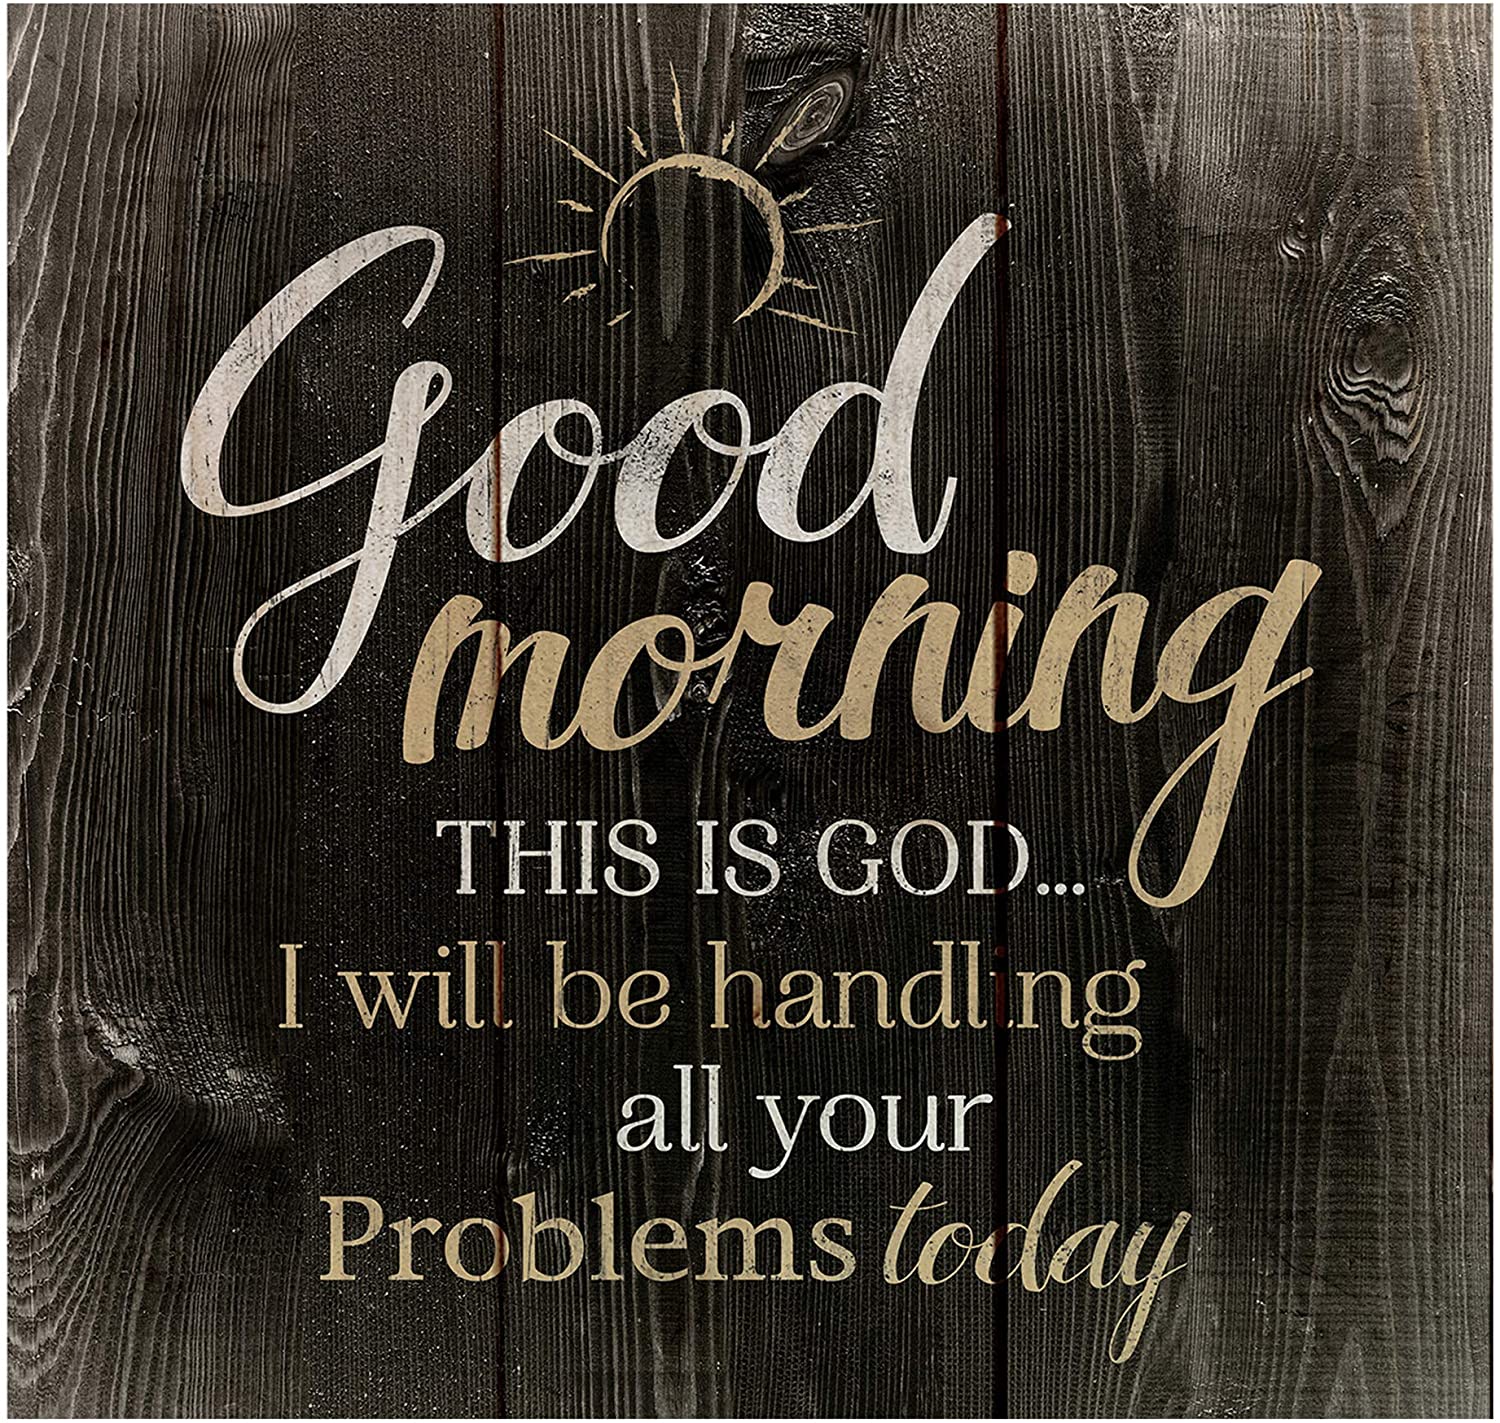 Good Morning This is God… | Rustic Dark 10" x 10" Wooden Pallet Wall Art Sign w/ Hanger and Peg Stand